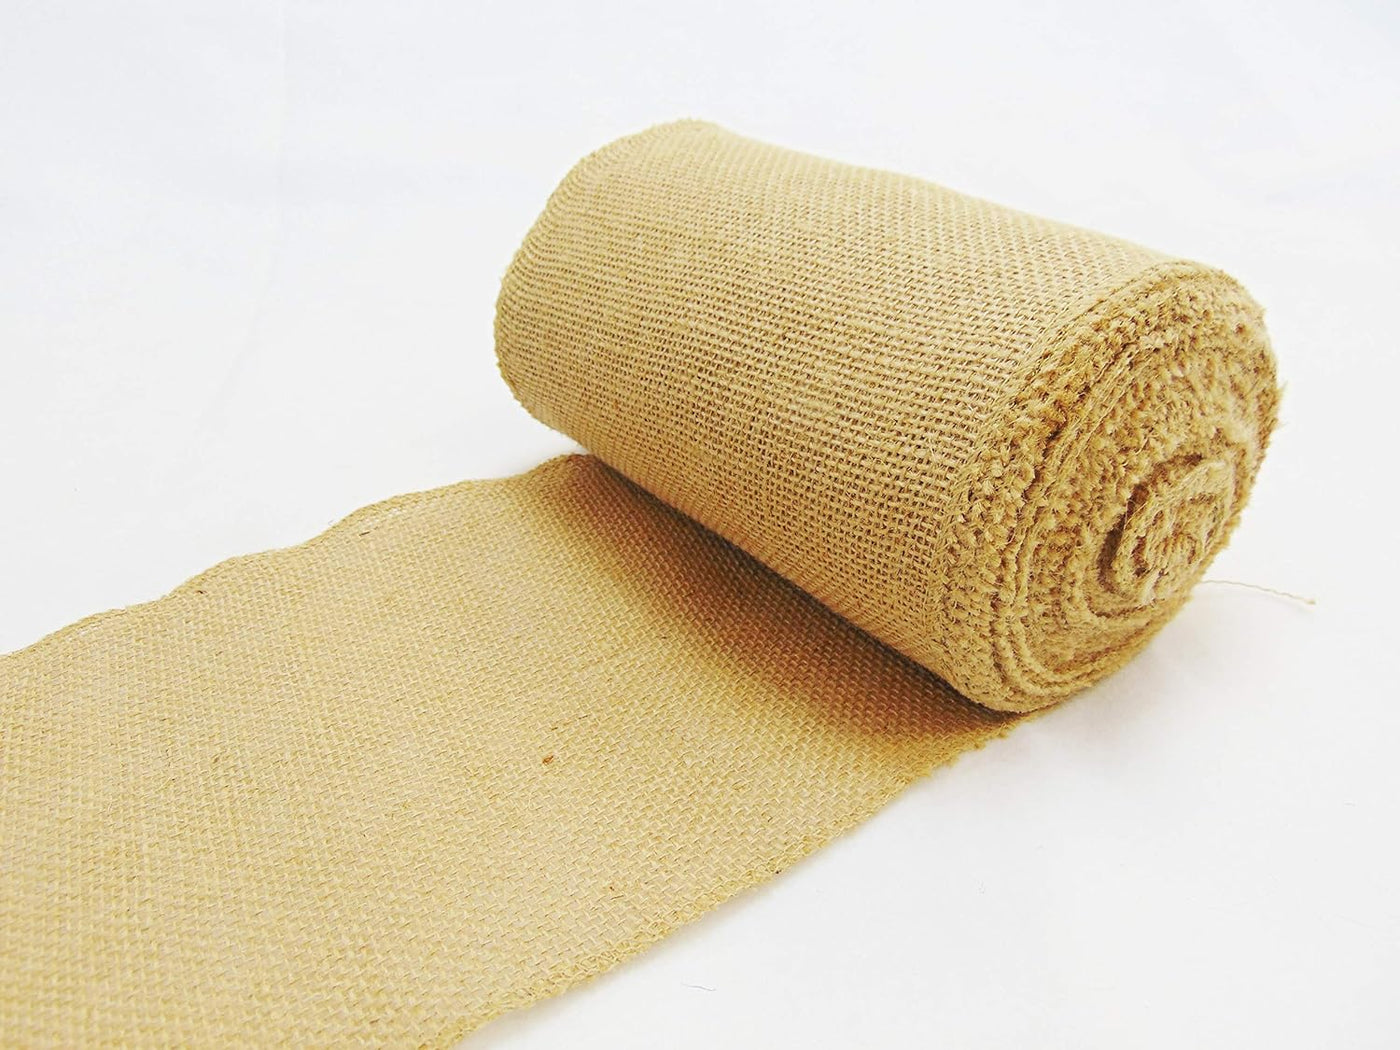 8 inch wide by 60 feet long tight weaved burlap tree plants wrap for protection ribbon | high density finished edges country style indoor outdoor table runner